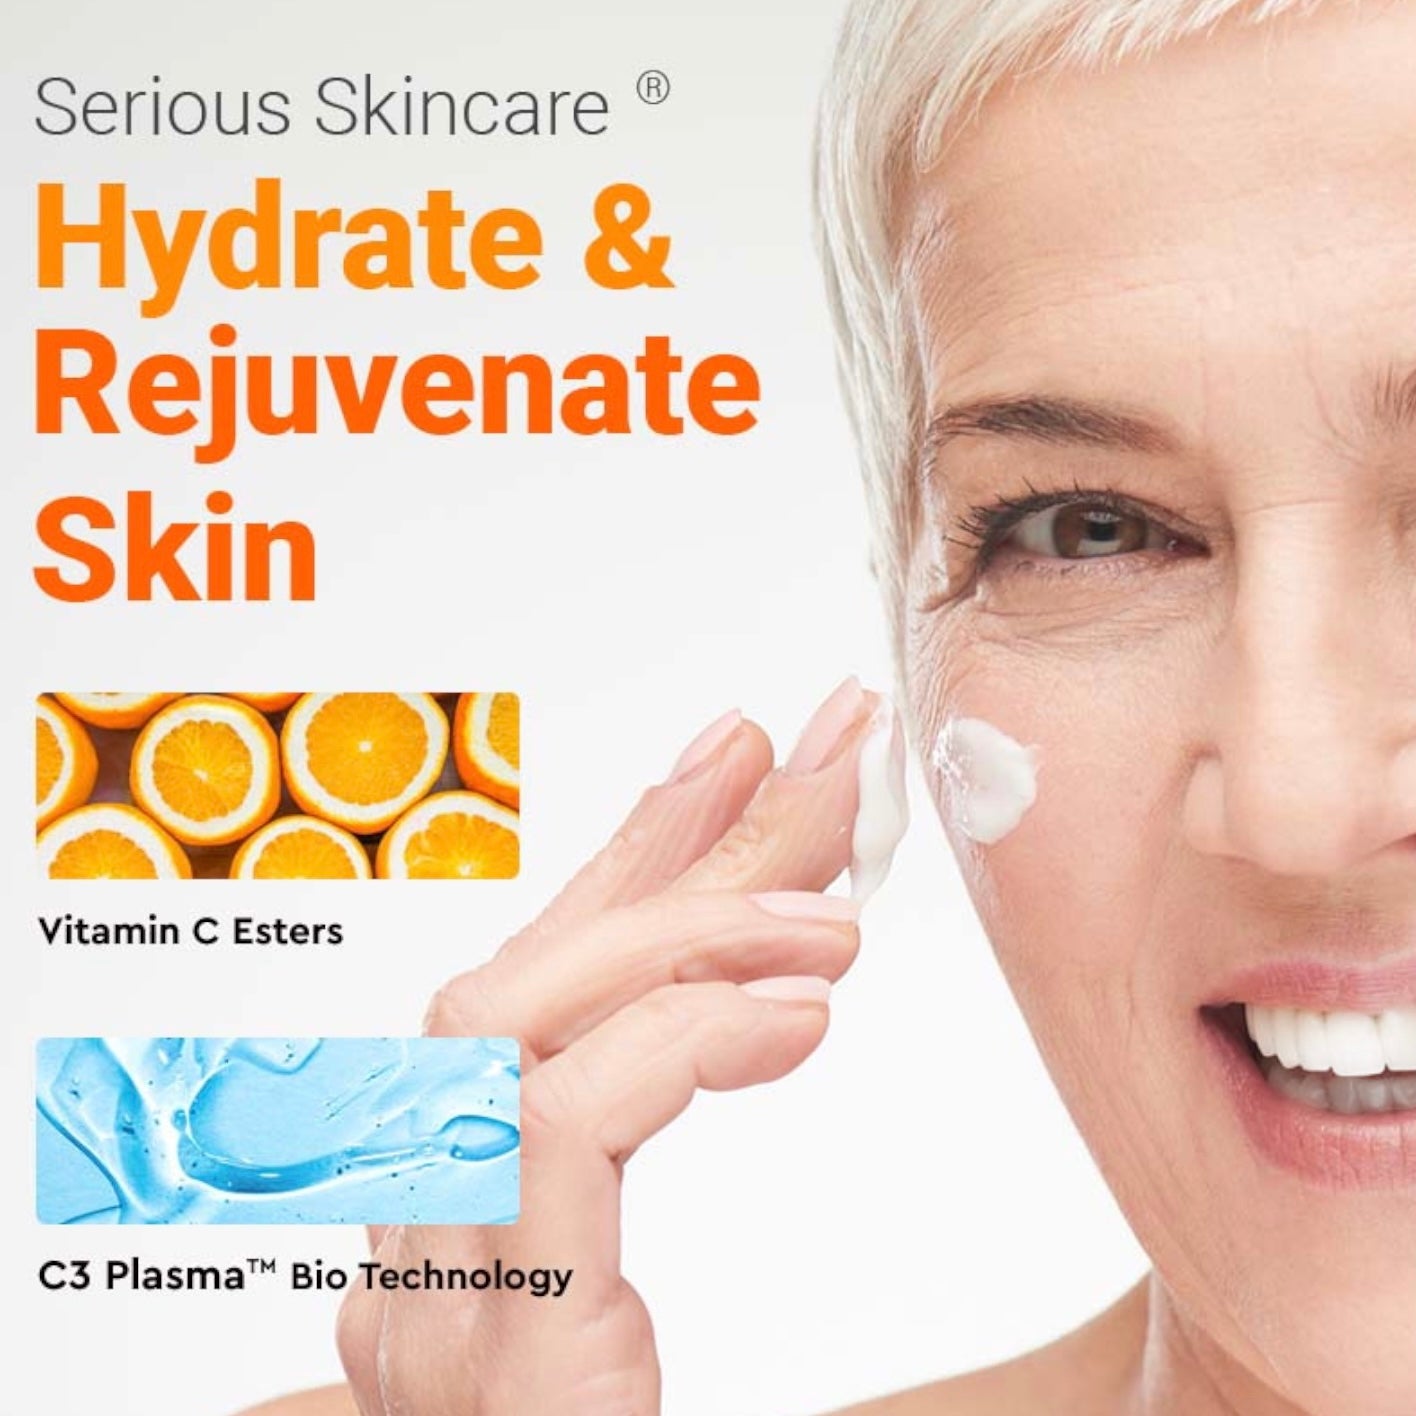 Hydrate and rejunvate skin with Serious Skincare vitamin c esters